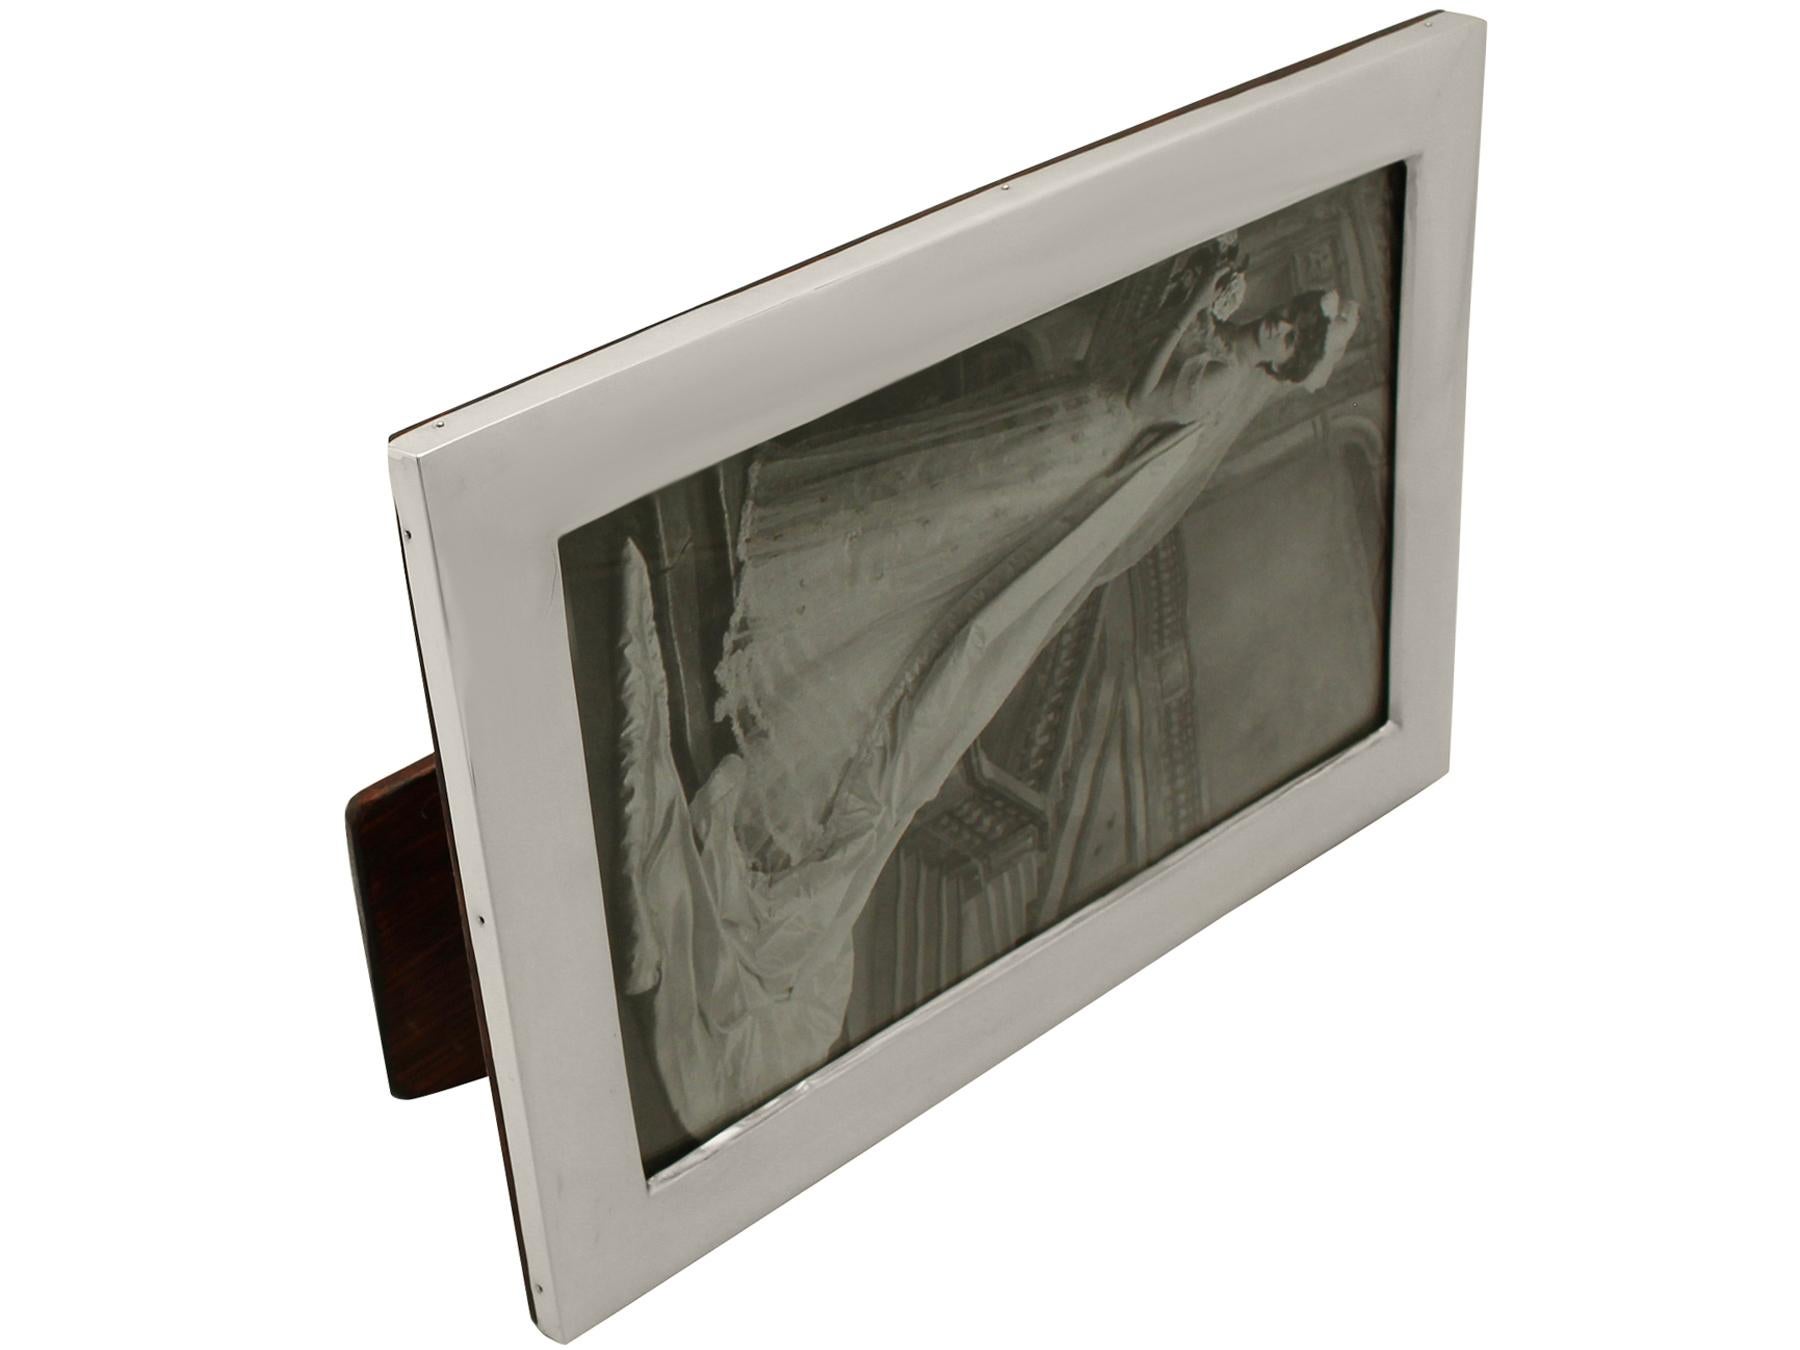 An exceptional, fine and impressive, large antique George V English sterling silver photograph frame; an addition to our ornamental silverware collection.

This exceptional antique George V sterling silver photograph frame has a plain rectangular